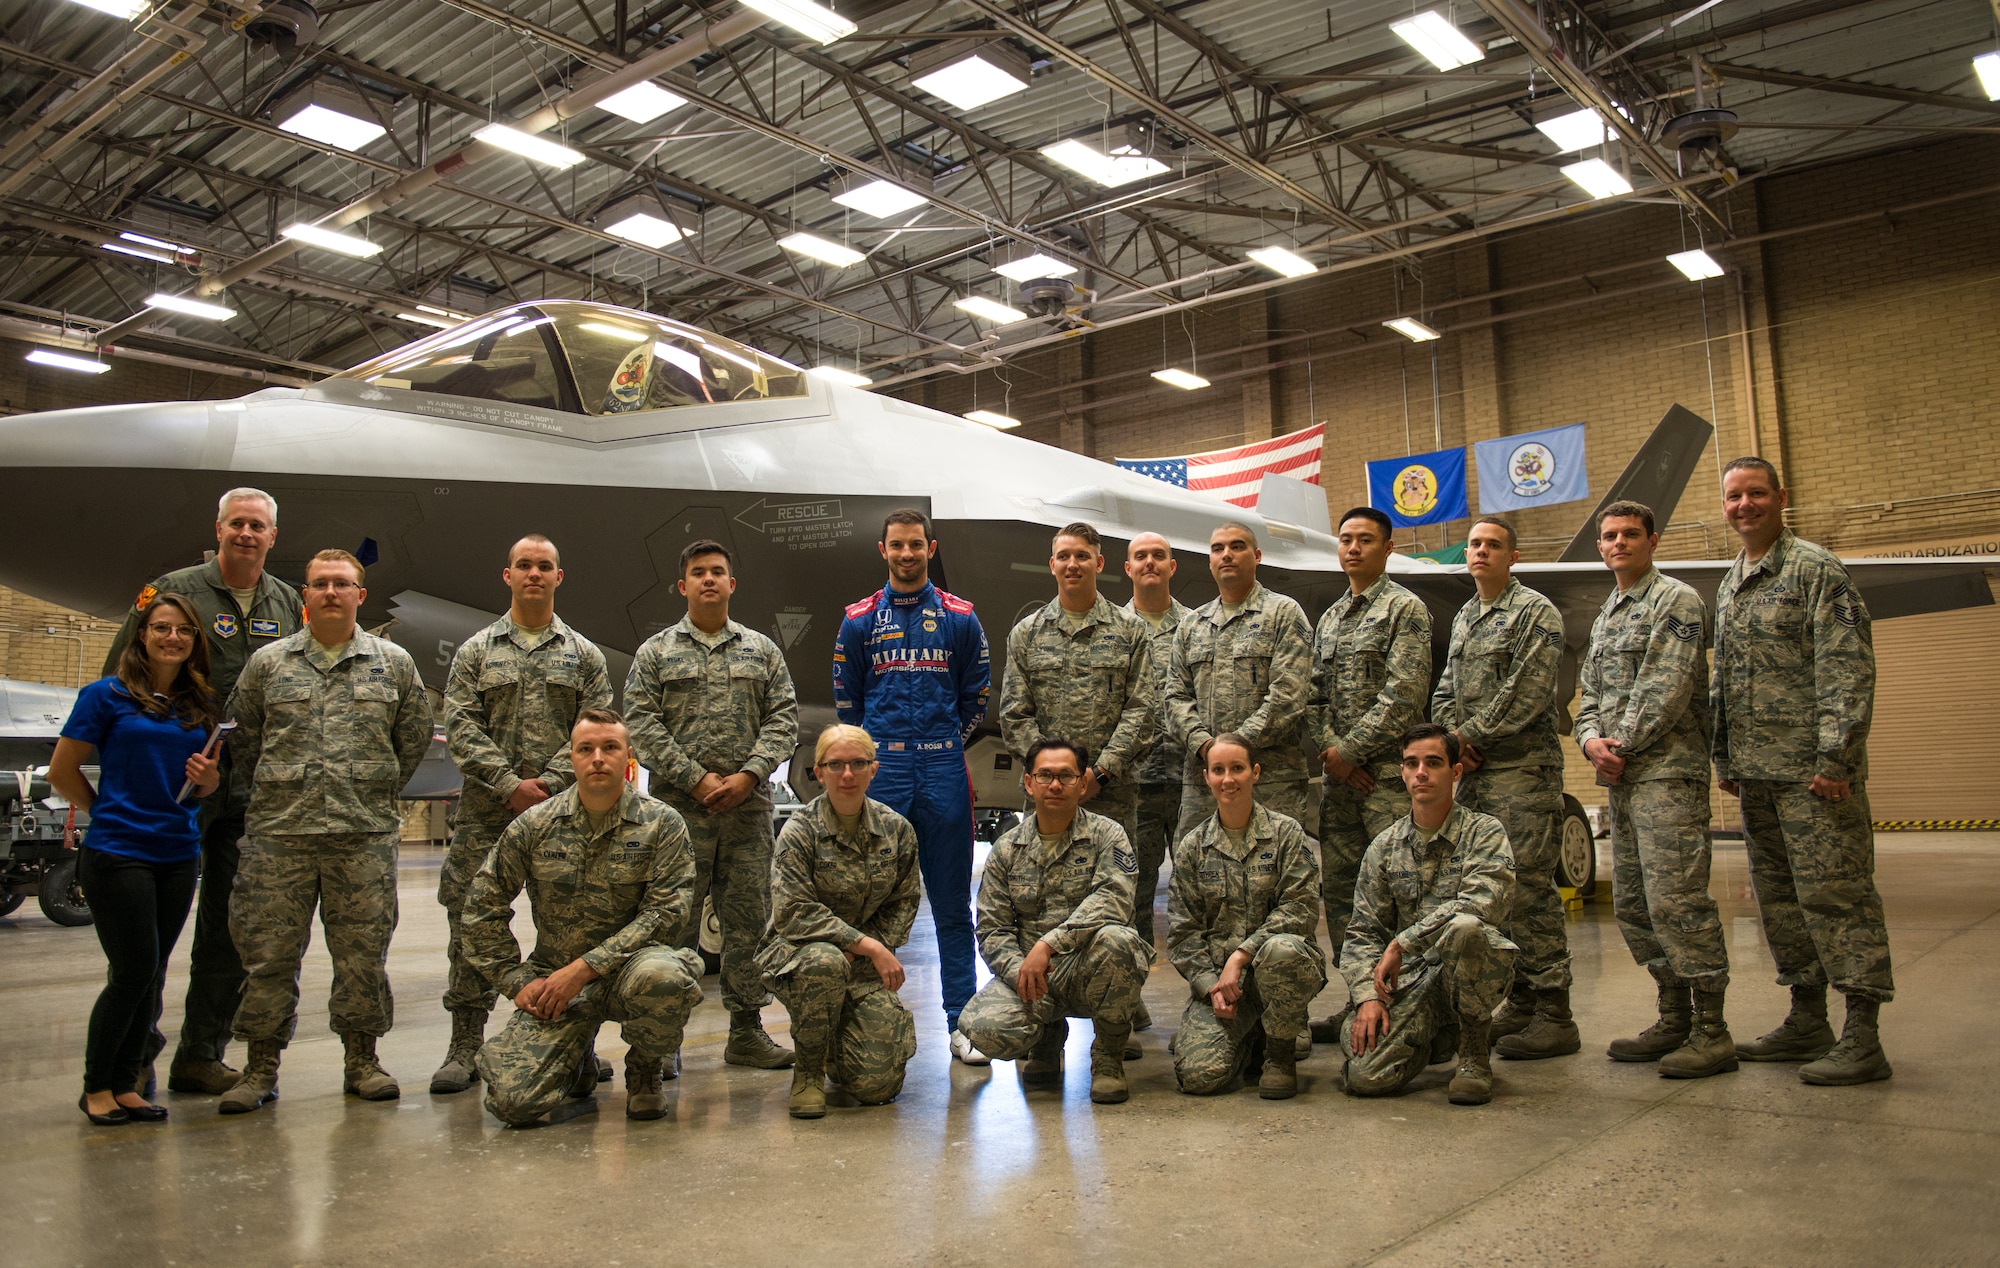 Alexander Rossi, Andretti Autosport team race car driver, poses for a group photo with Thunderbolts from the 61st Aircraft Maintenance Unit at Luke Air Force Base, Ariz., April 5, 2018. During their visit, Rossi and his team visited various units around base to gain insight on the mission of Luke and its Airmen. (U.S. Air Force photo by Airman 1st Class Alexander Cook)